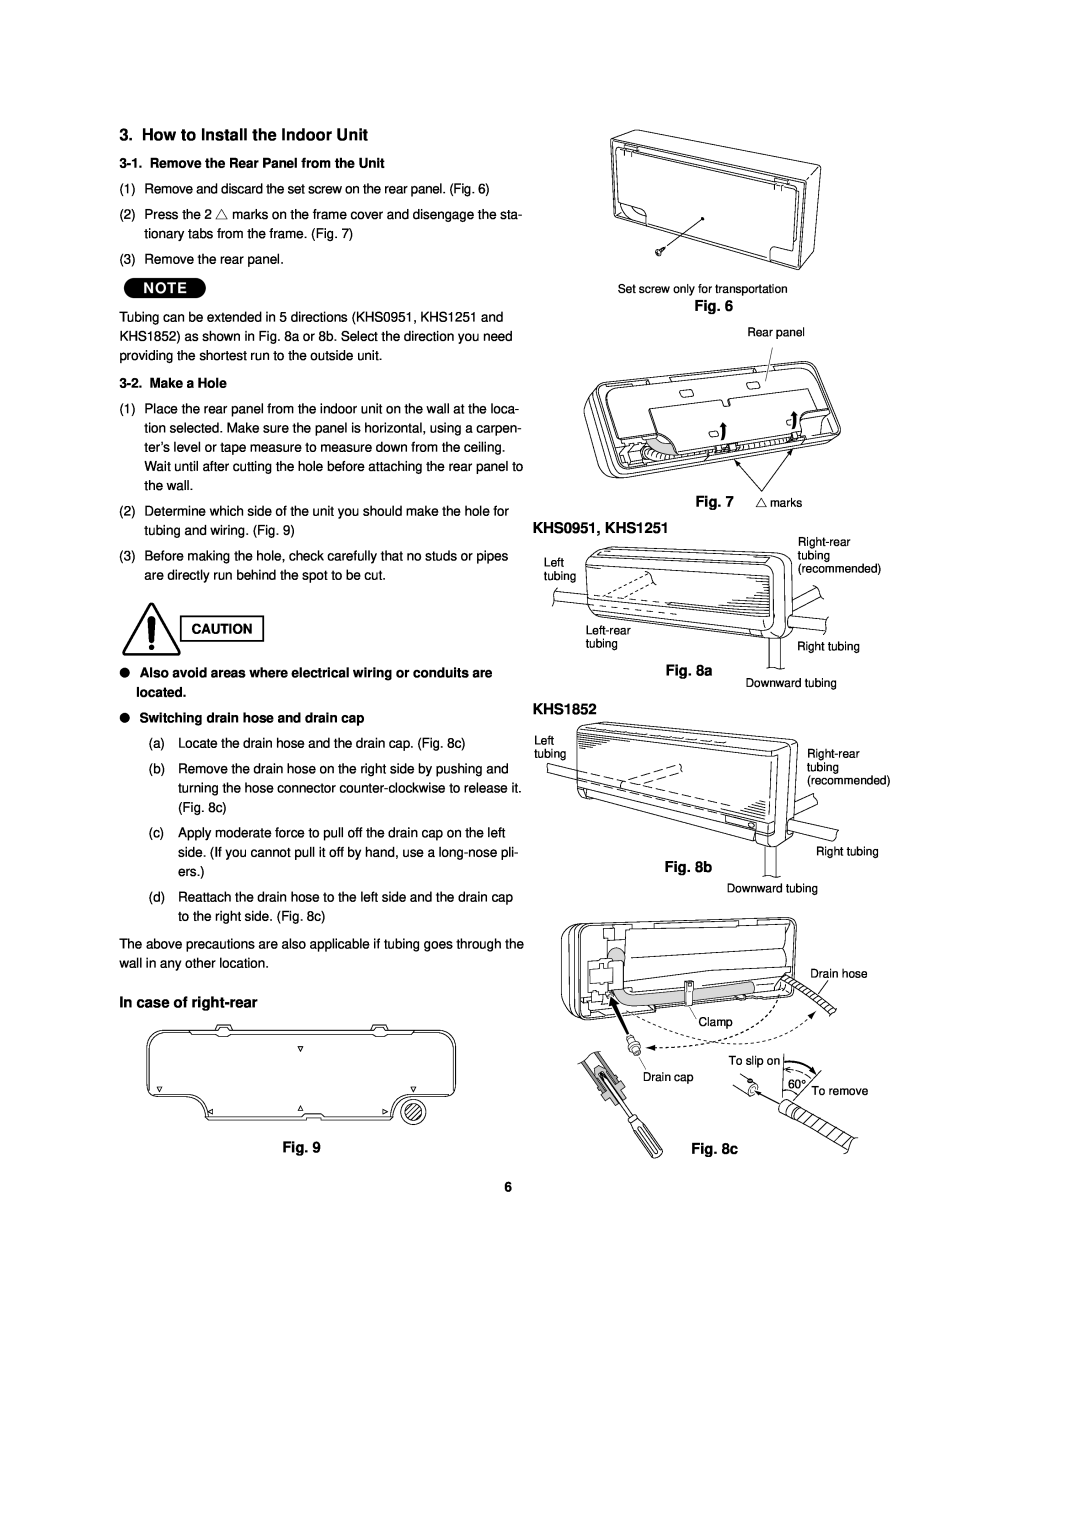 Sanyo CH1251 How to Install the Indoor Unit, marks KHS0951, KHS1251, KHS1852, b, In case of right-rear, Make a Hole 